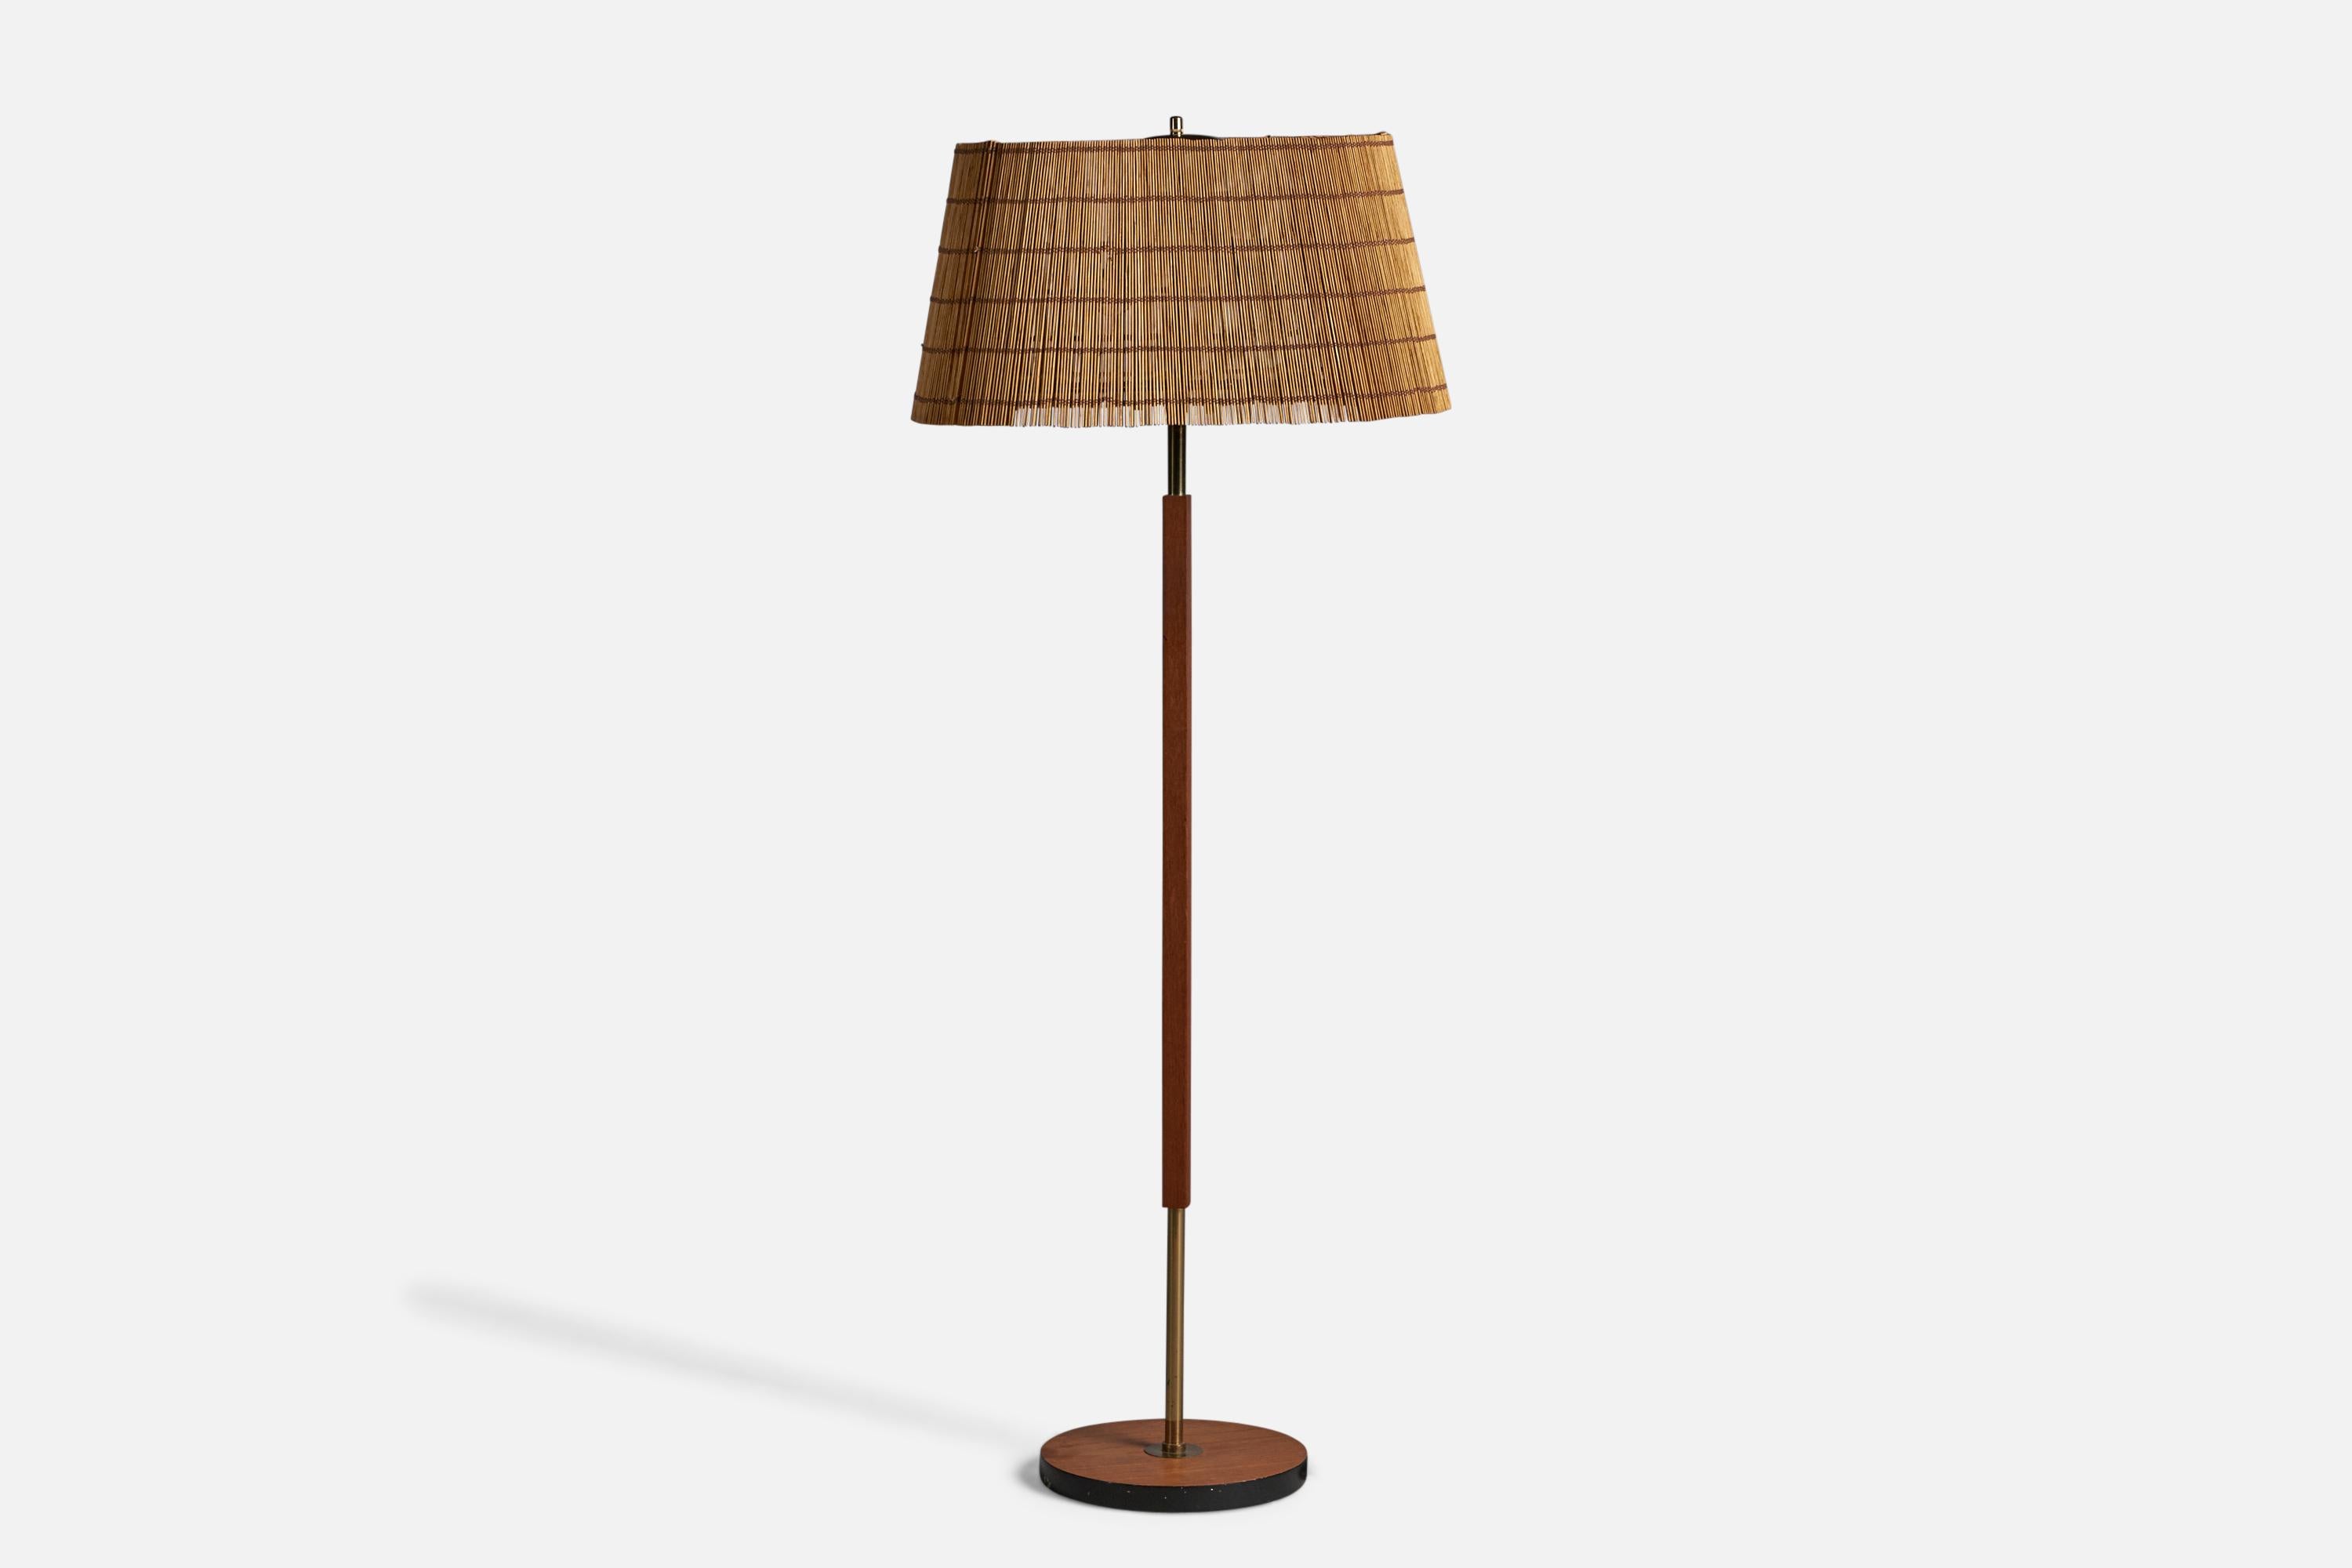 A brass, wood and reed floor lamp, designed and produced by Lival OY, Finland, 1950s.

Overall Dimensions (inches): 54.5